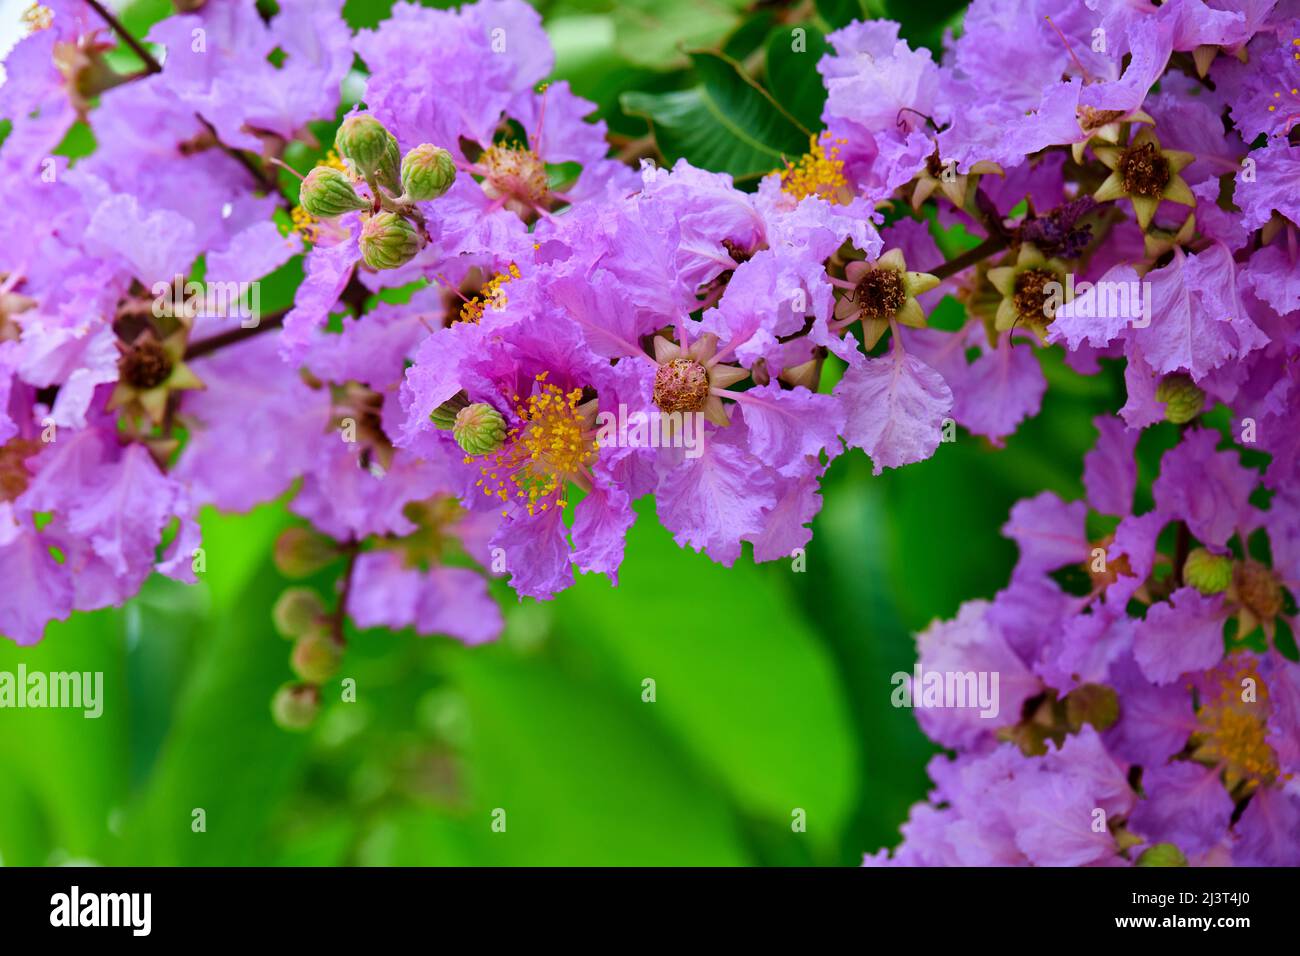 Close-up bunch of purple lagerstroemia hybrid flower bloom on tree branch Stock Photo